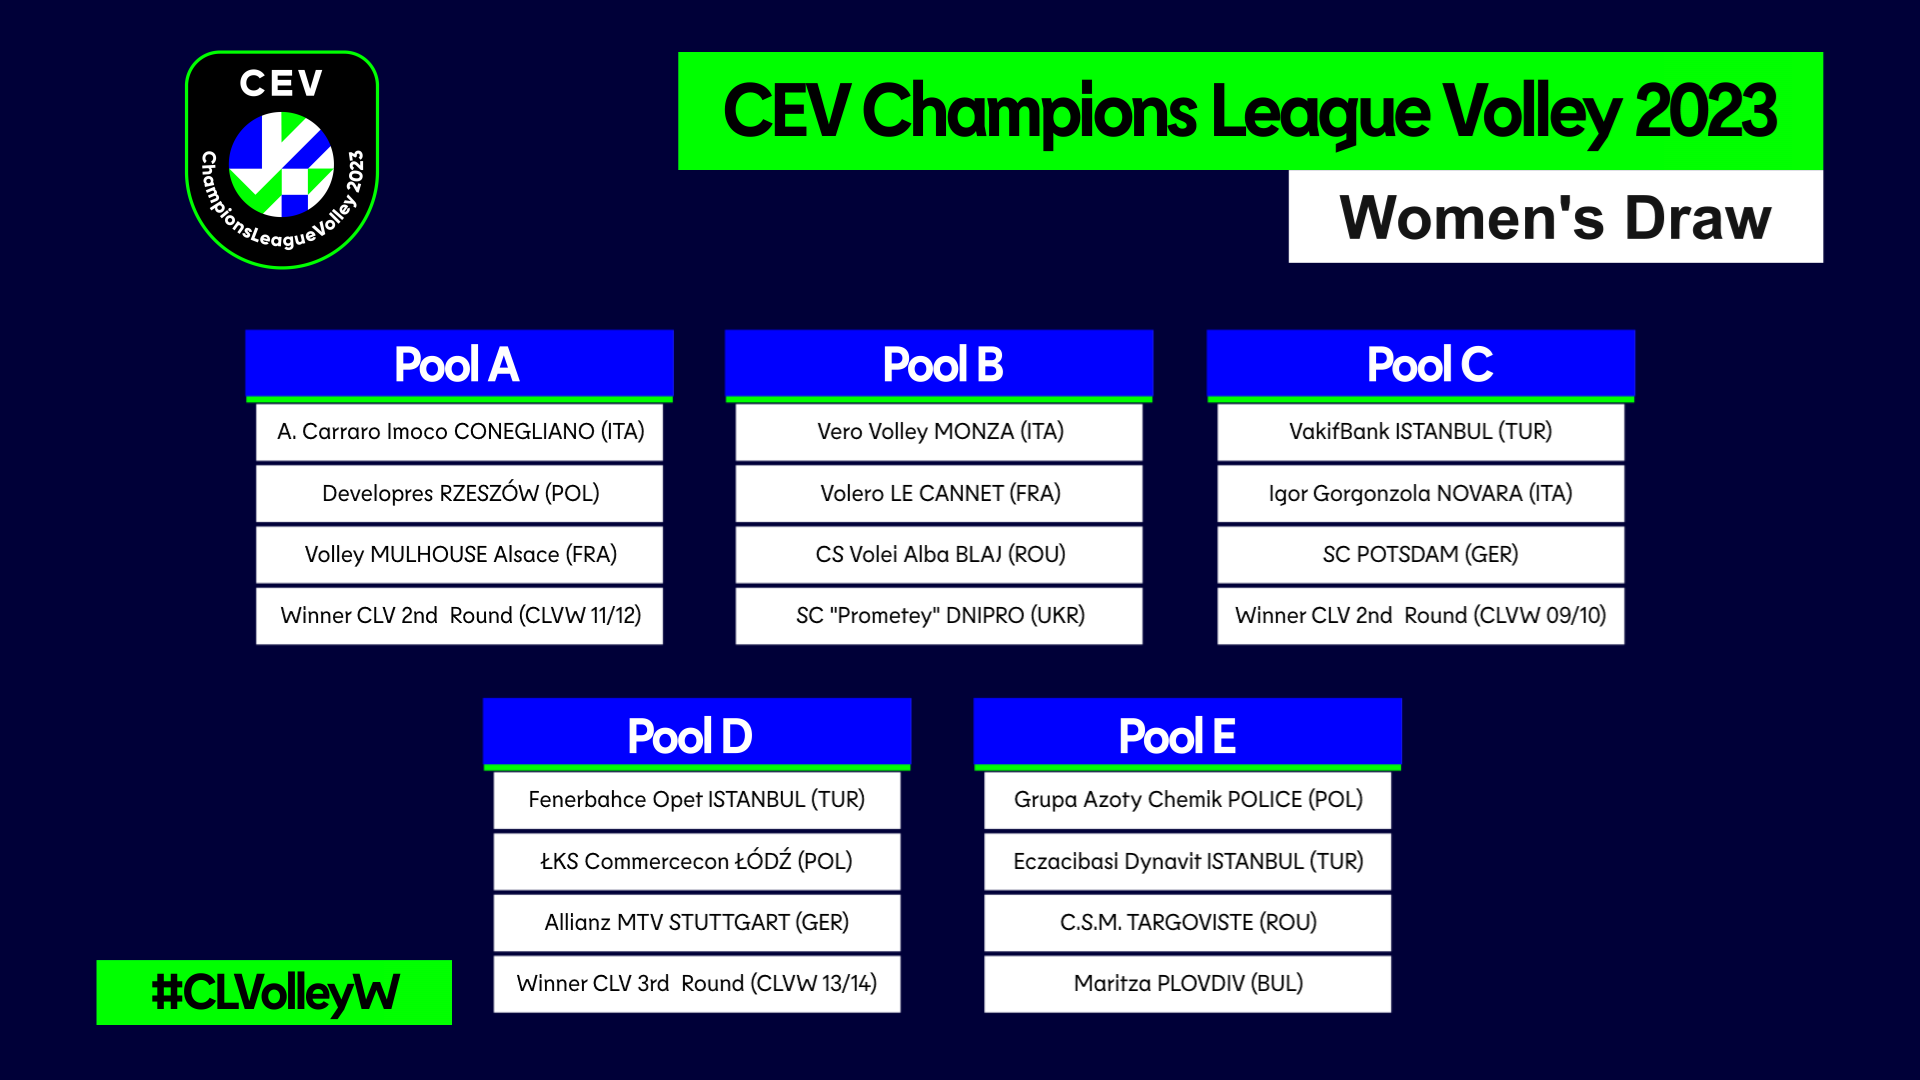 Drawing of Lots Sets Up Exciting CEV Champions League Volley 2023 Season